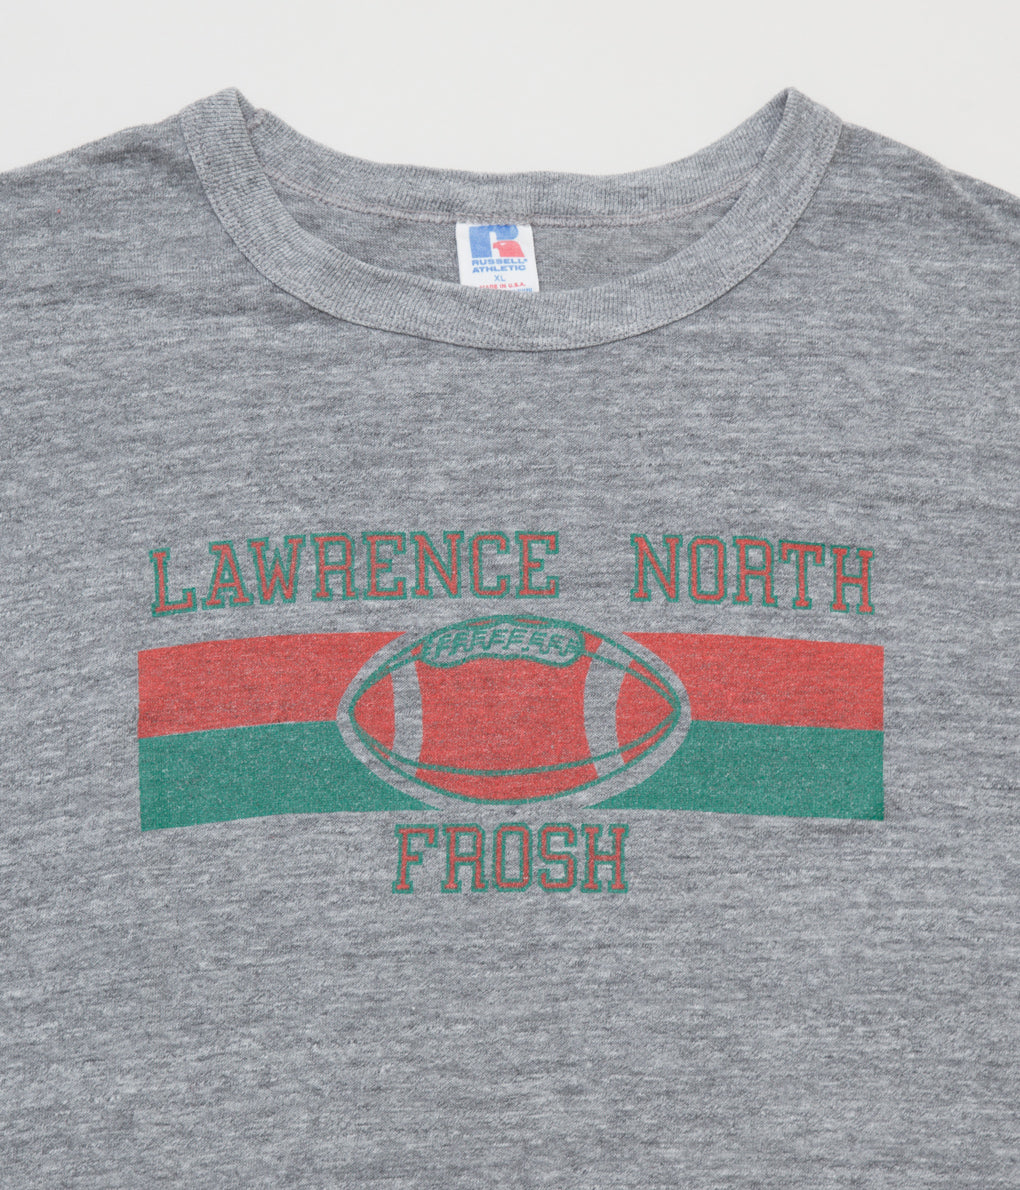 VINTAGE "80'S "LAWRENCE NORTH" T-SHIRT"(GREY)